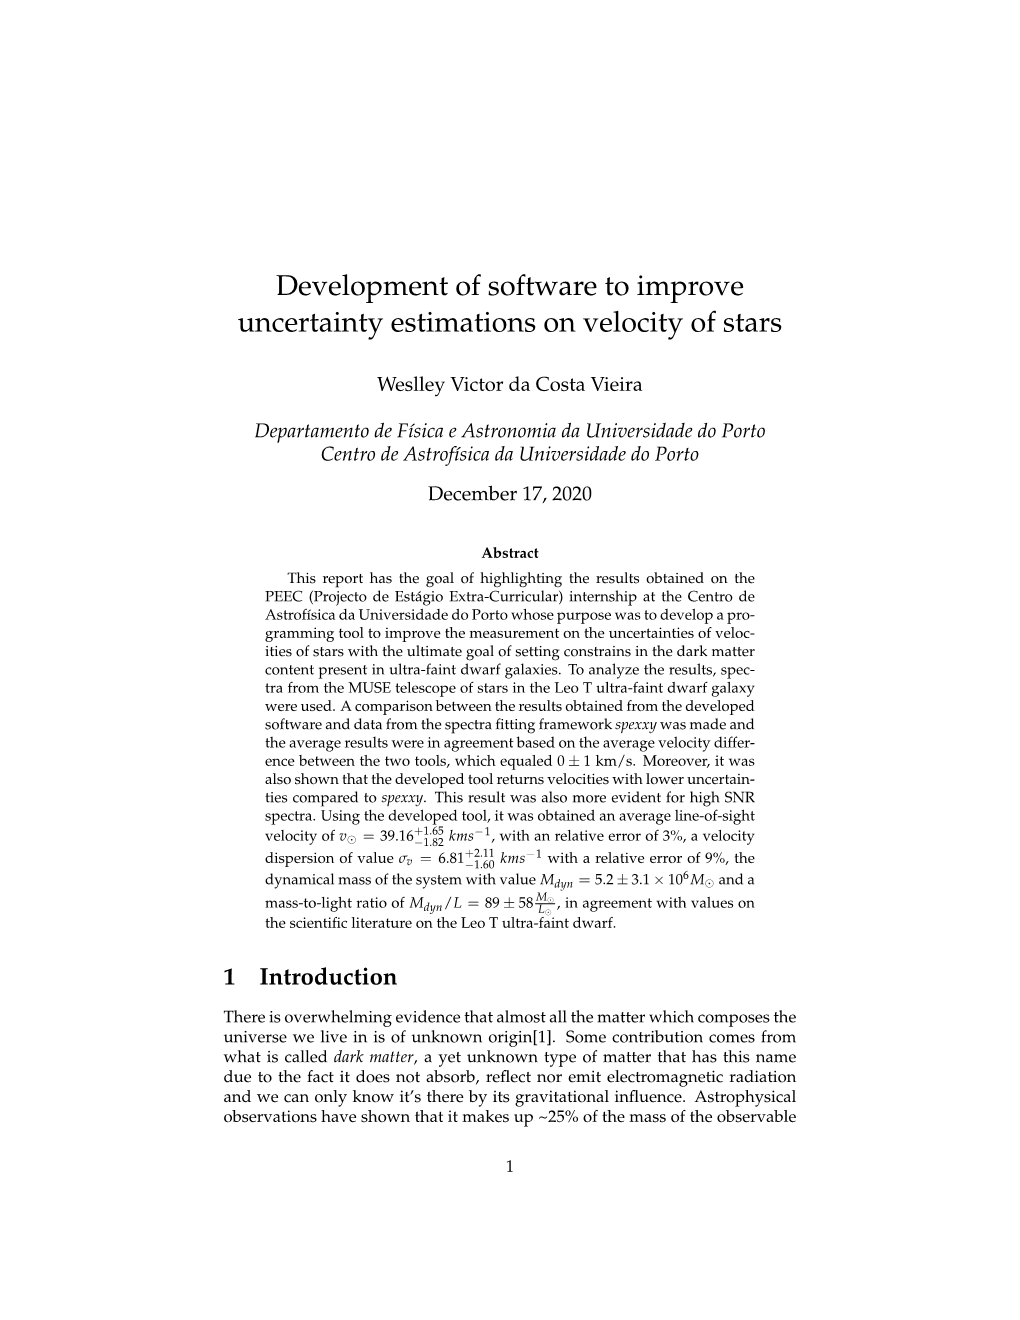 Development of Software to Improve Uncertainty Estimations on Velocity of Stars